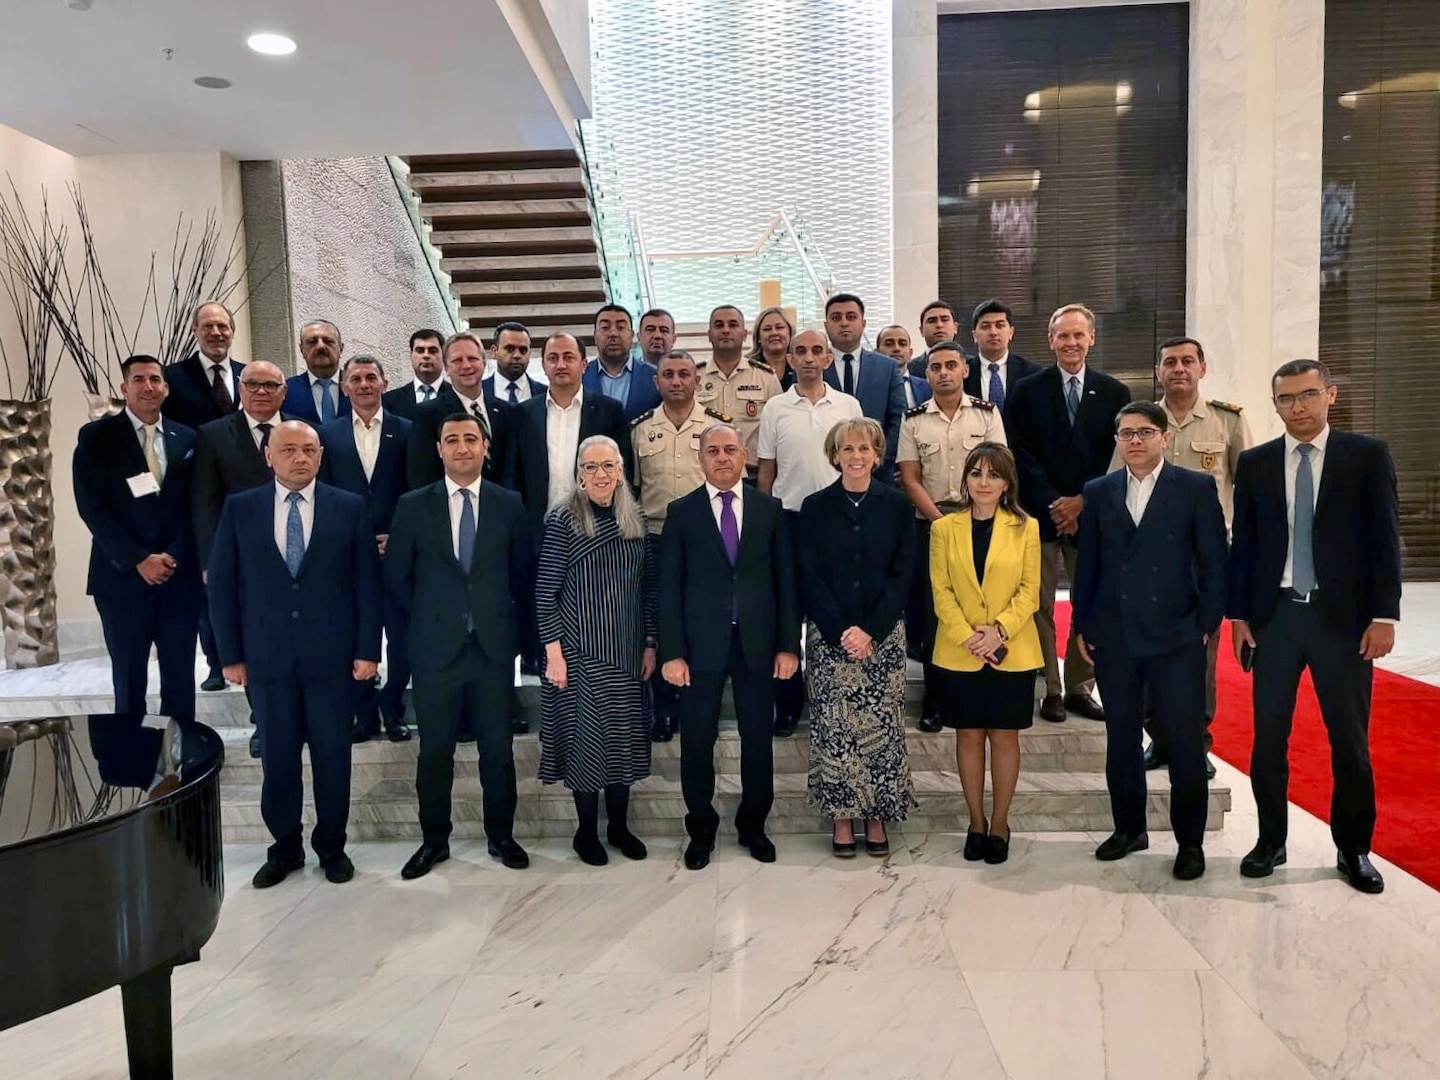 U.S. and Azerbaijan military and civilian officials participate in a disaster response tabletop exercise Sept. 20-22, 2022, in Baku, Azerbaijan. The exercise included first responders from Azerbaijan and the Oklahoma National Guard, who are partners under the State Partnership Program.